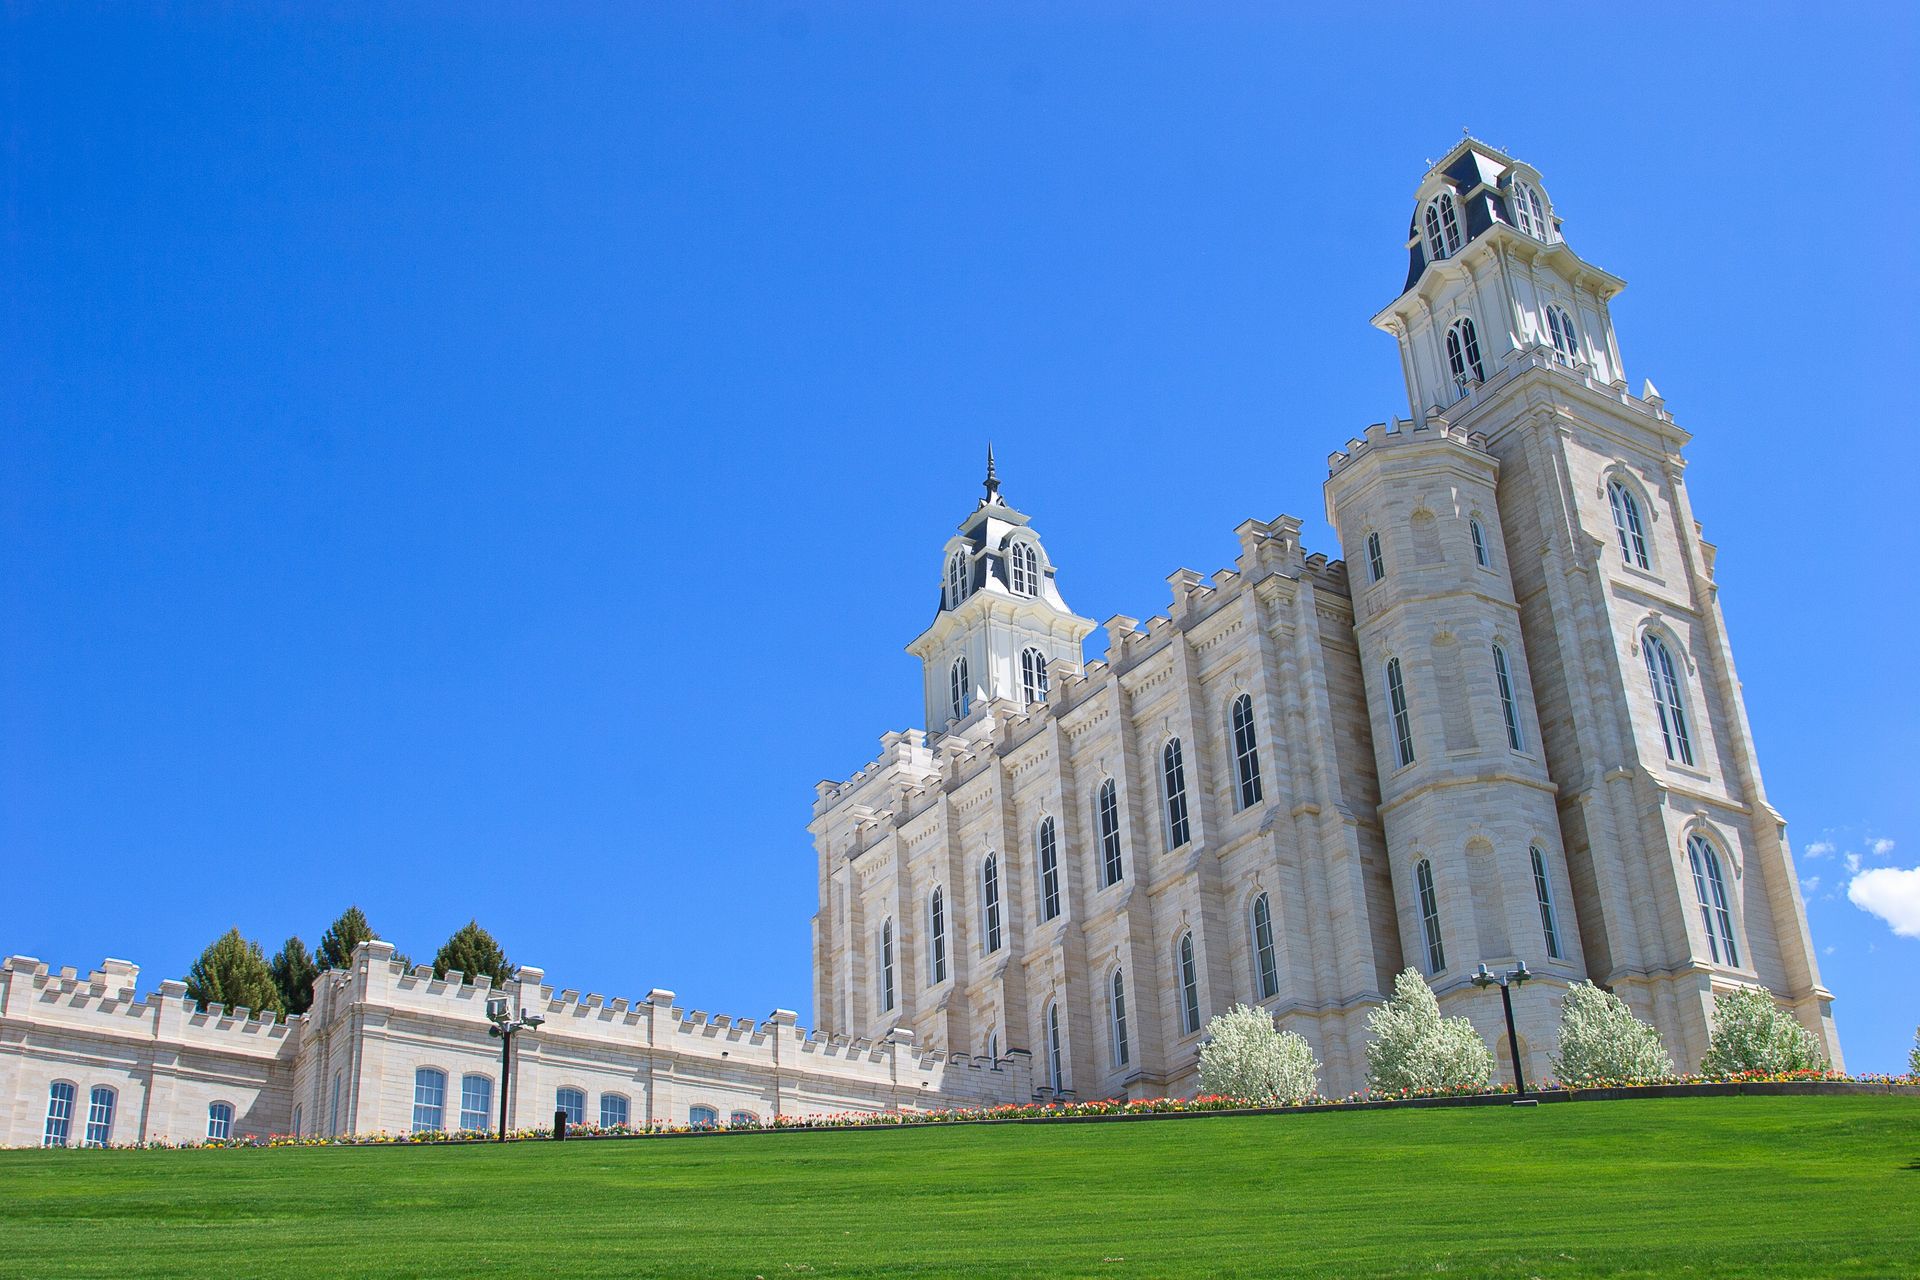 The Manti Utah Temple west view, including the entrance and scenery.  